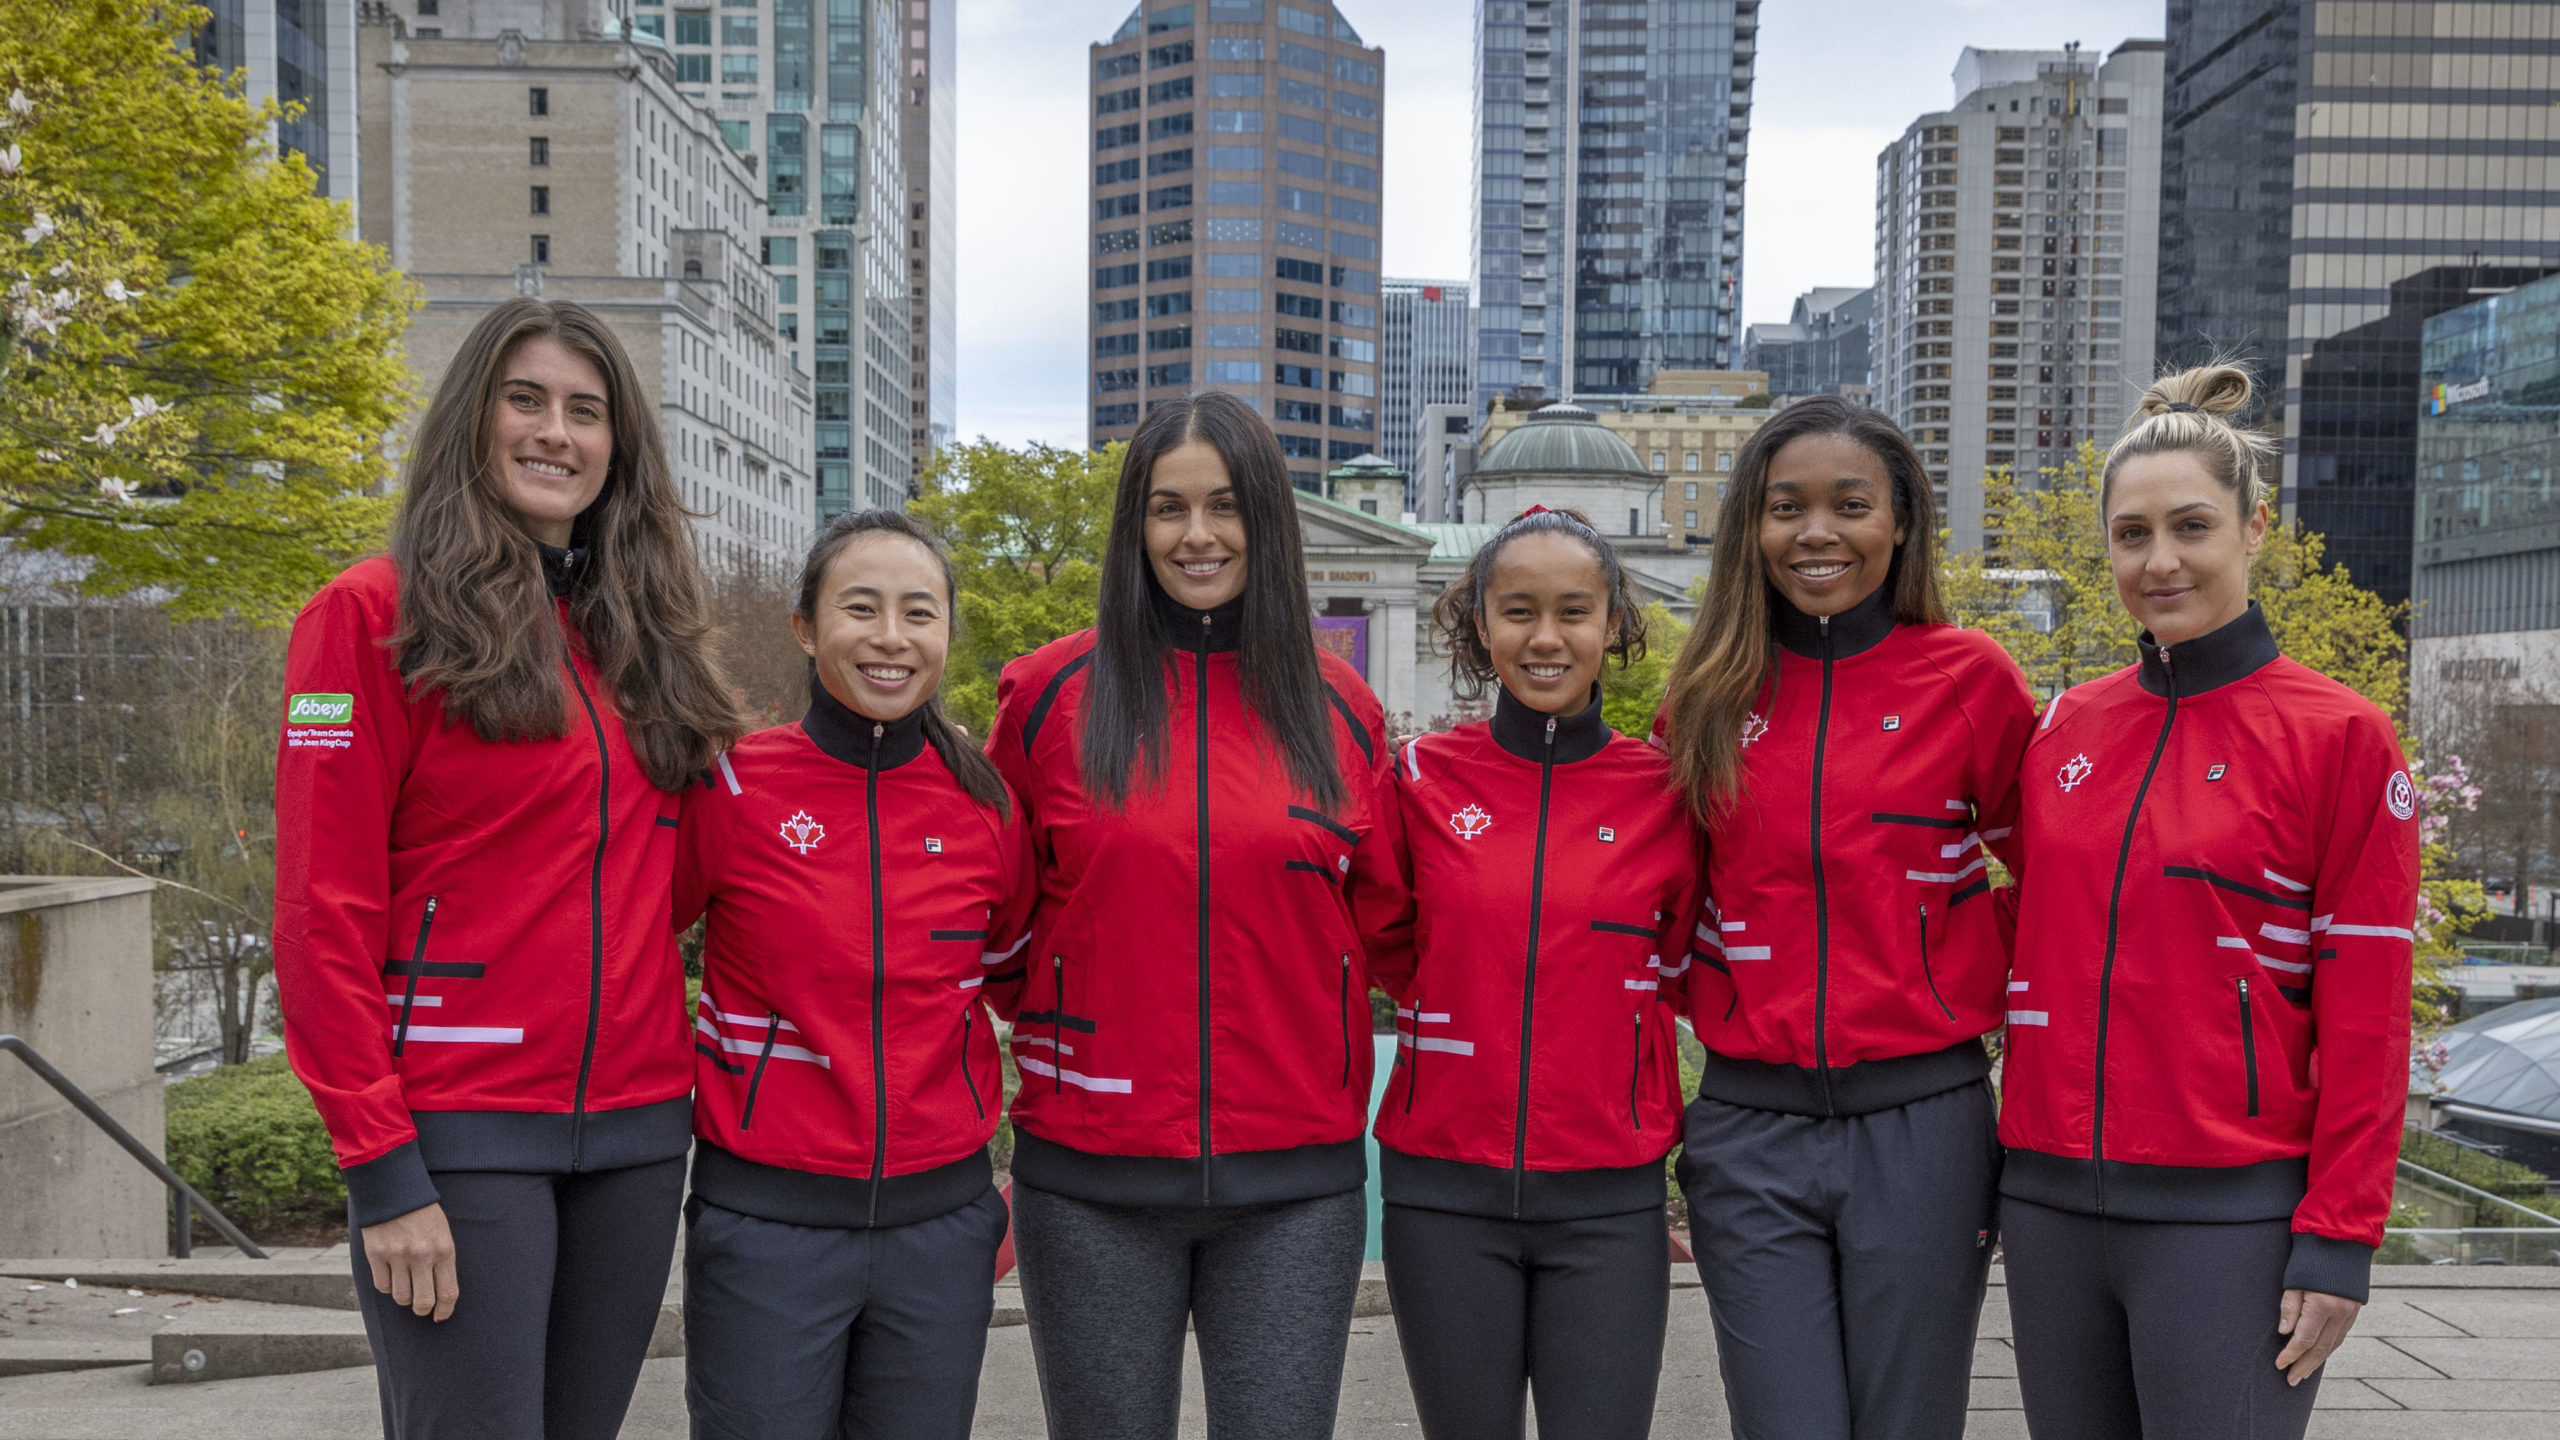 Billie Jean King Cup team at Vancouver